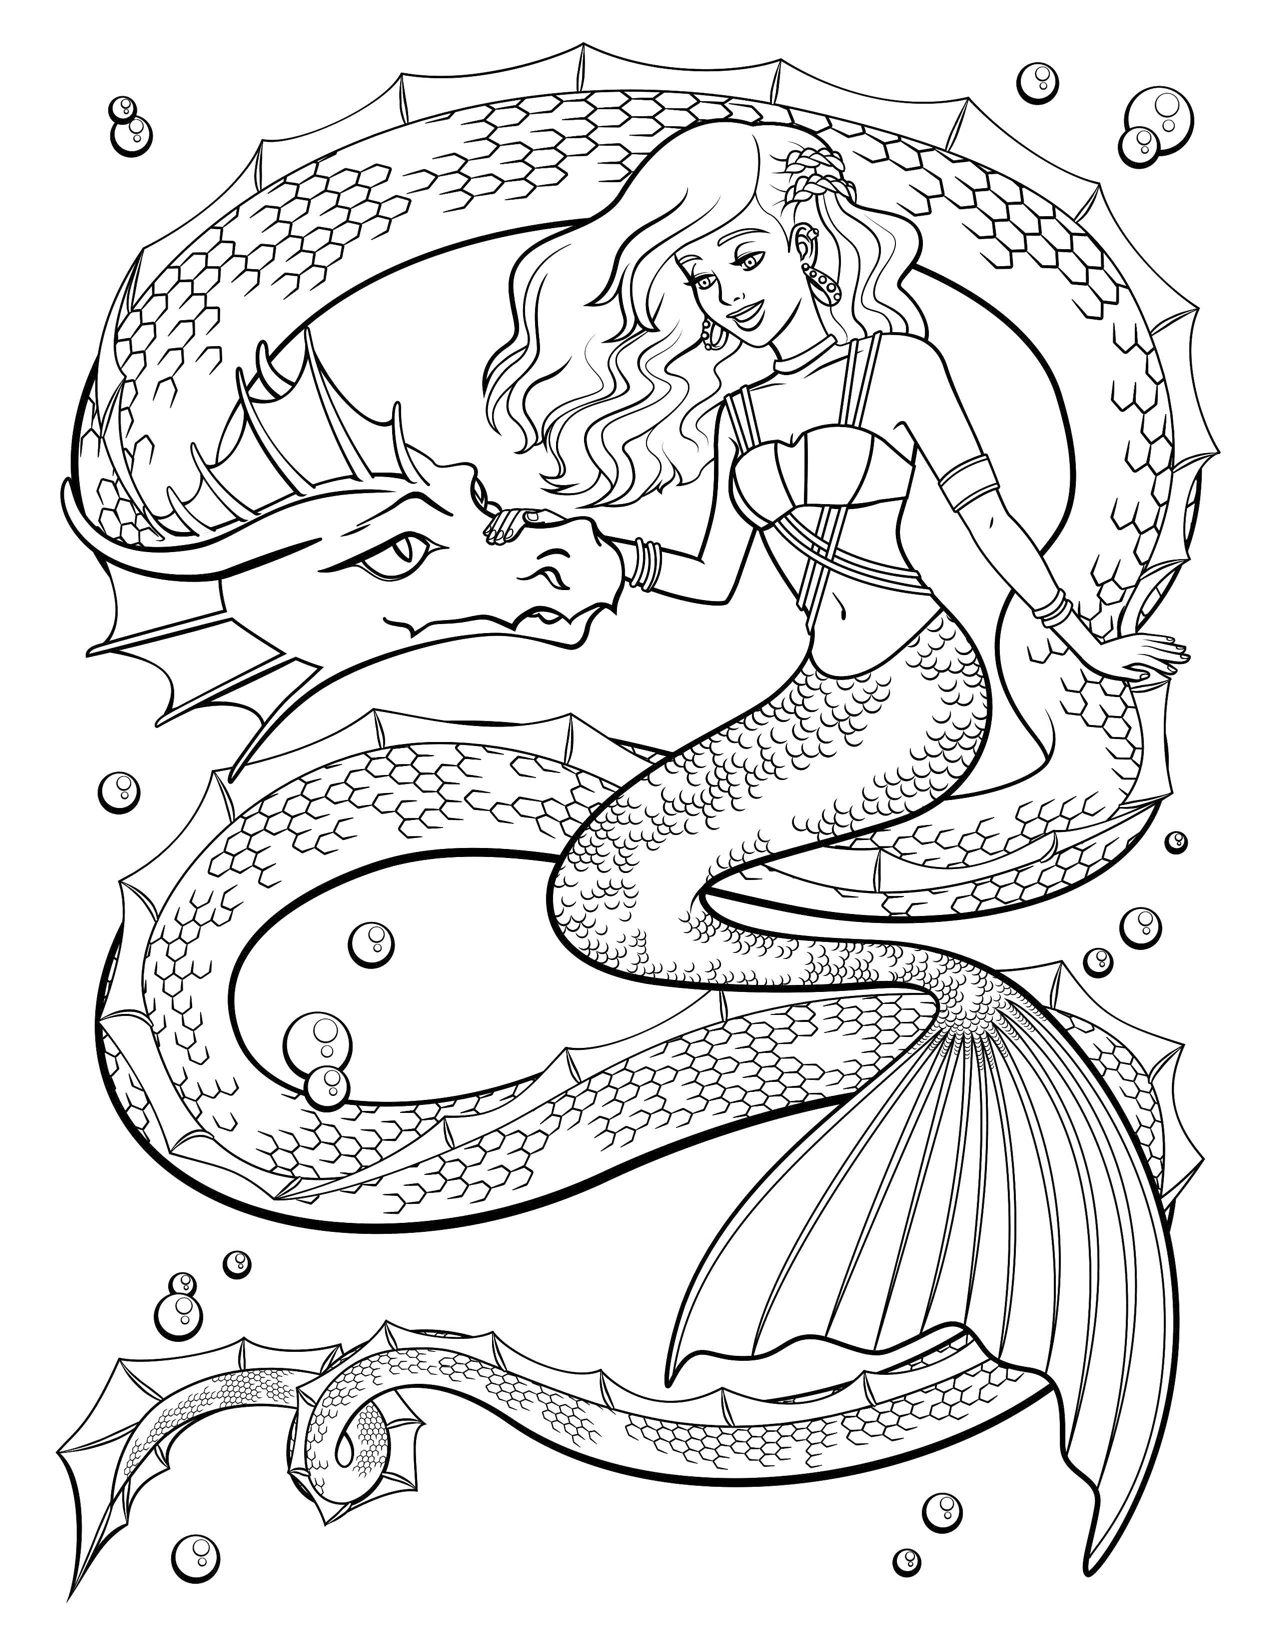 Mermaid with Dragon Coloring Page